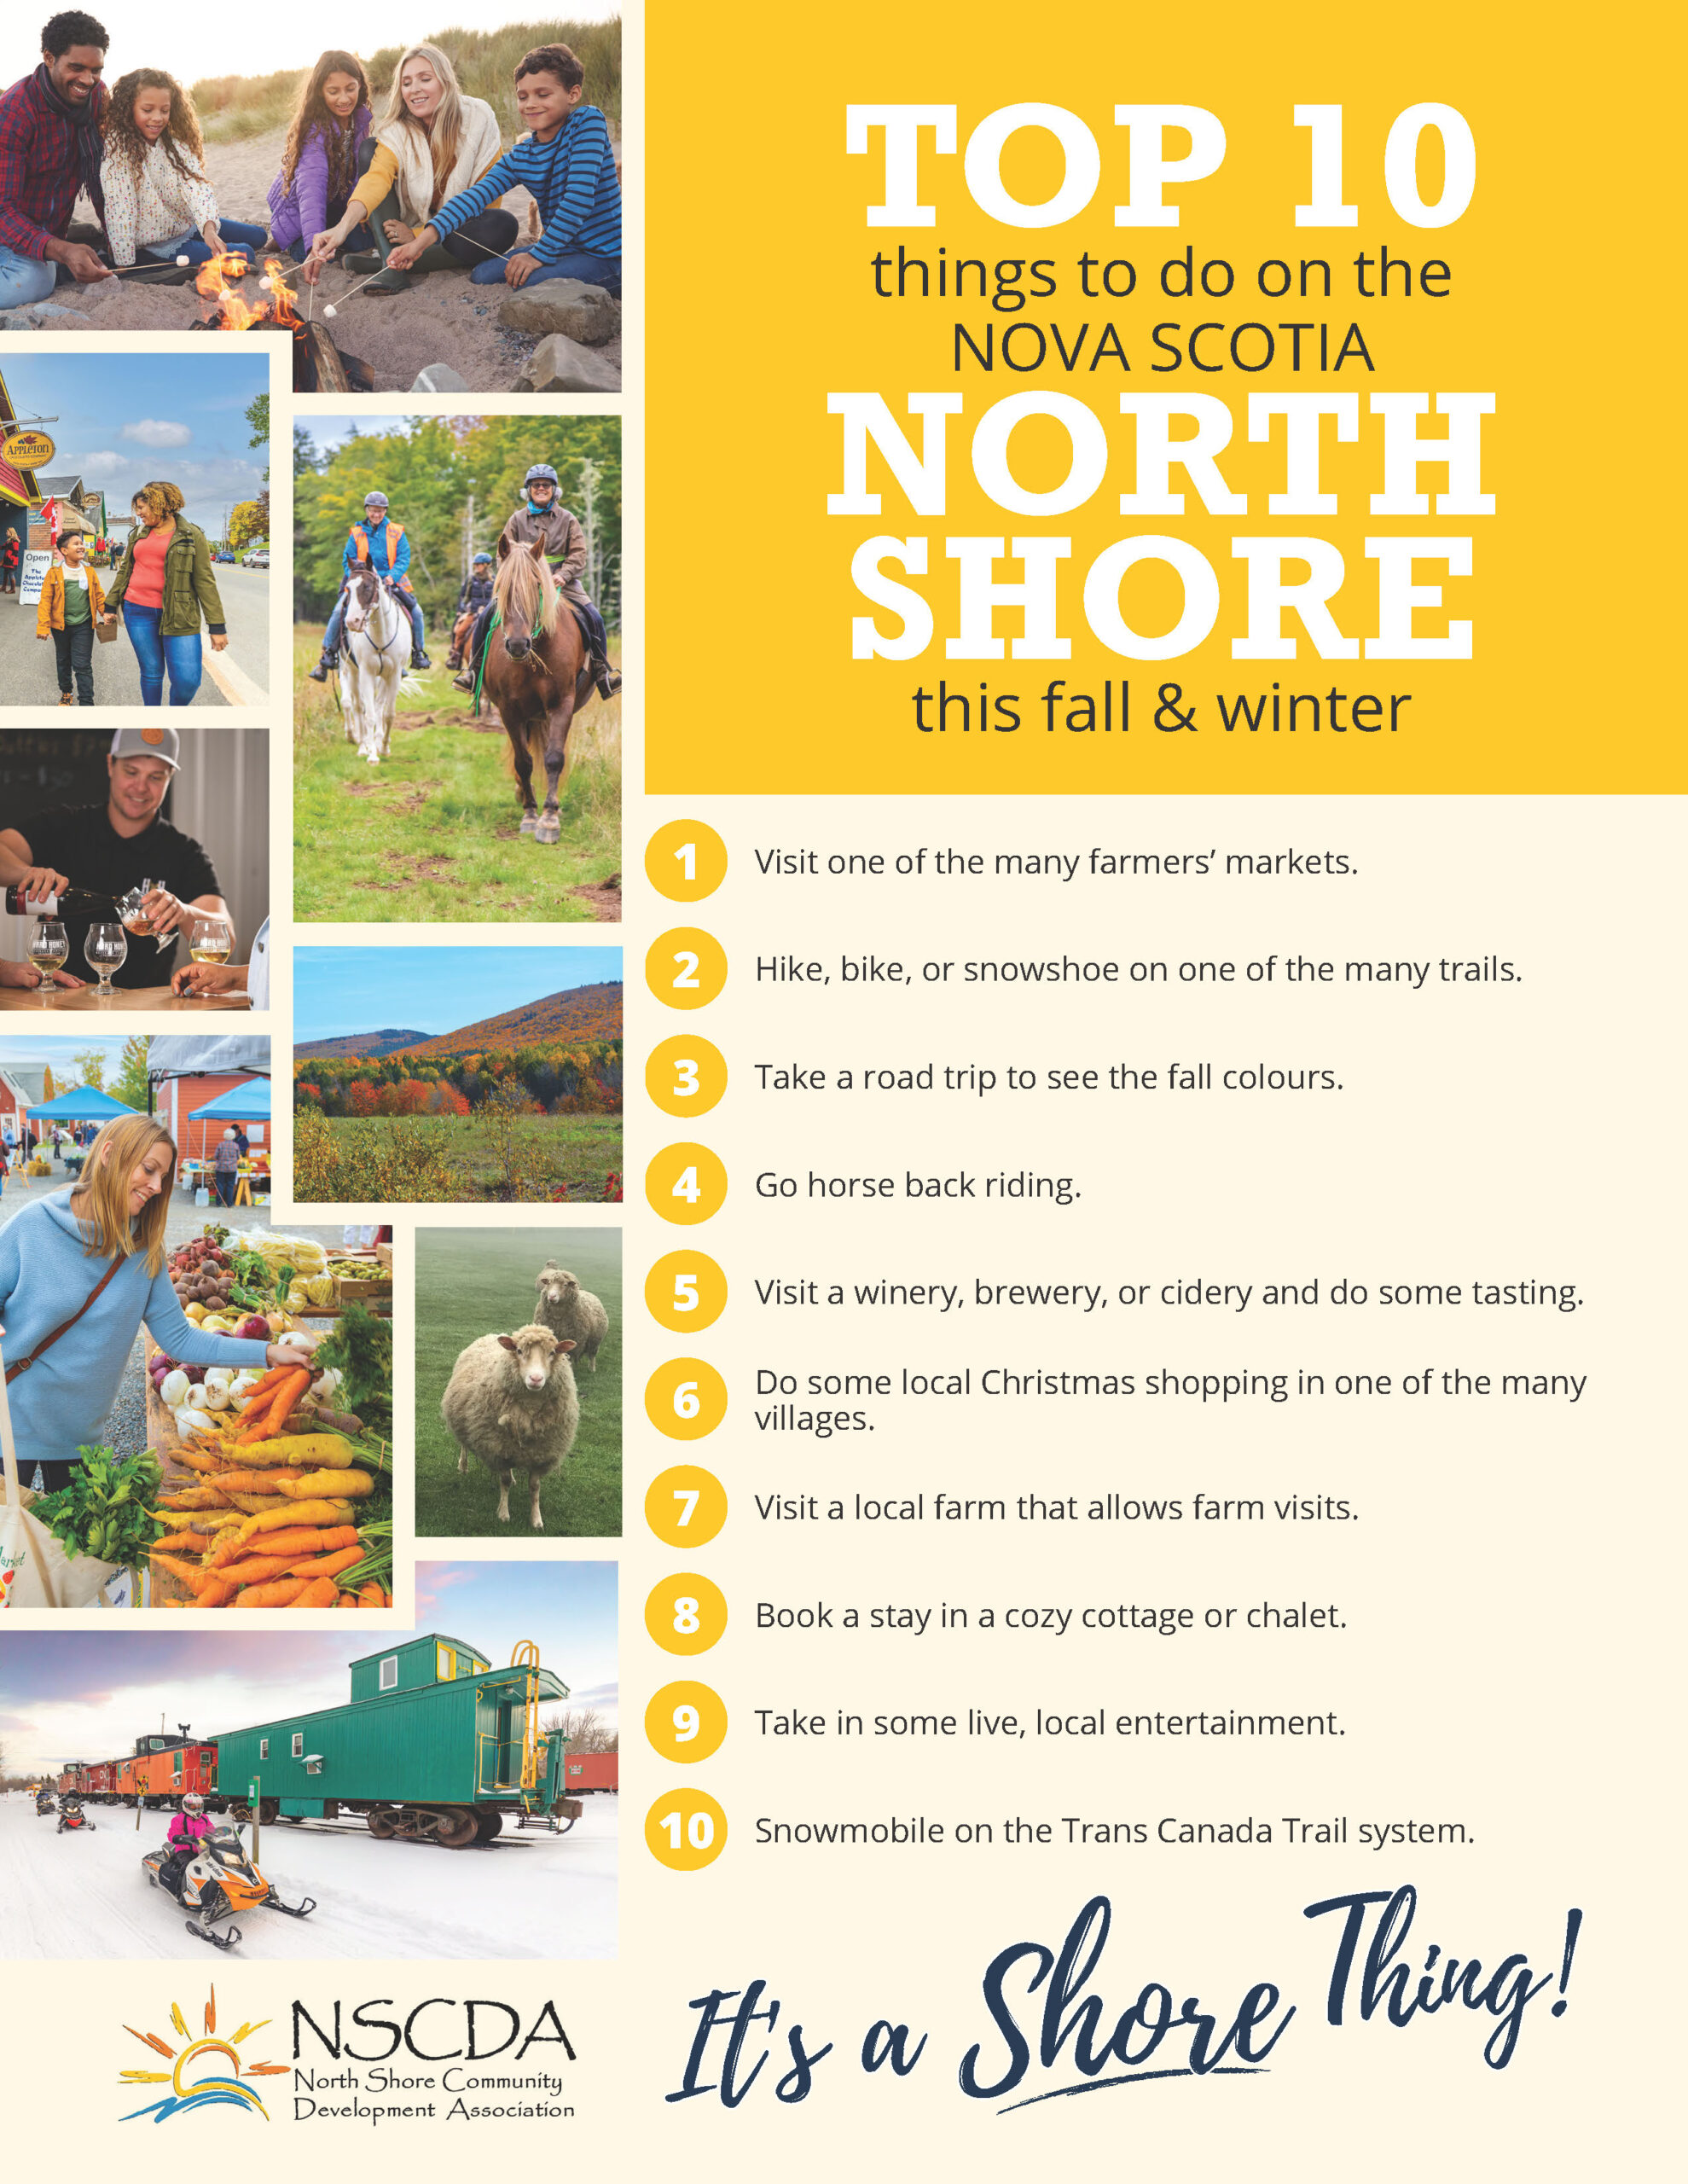 Things to do on the north shore of Nova Scotia